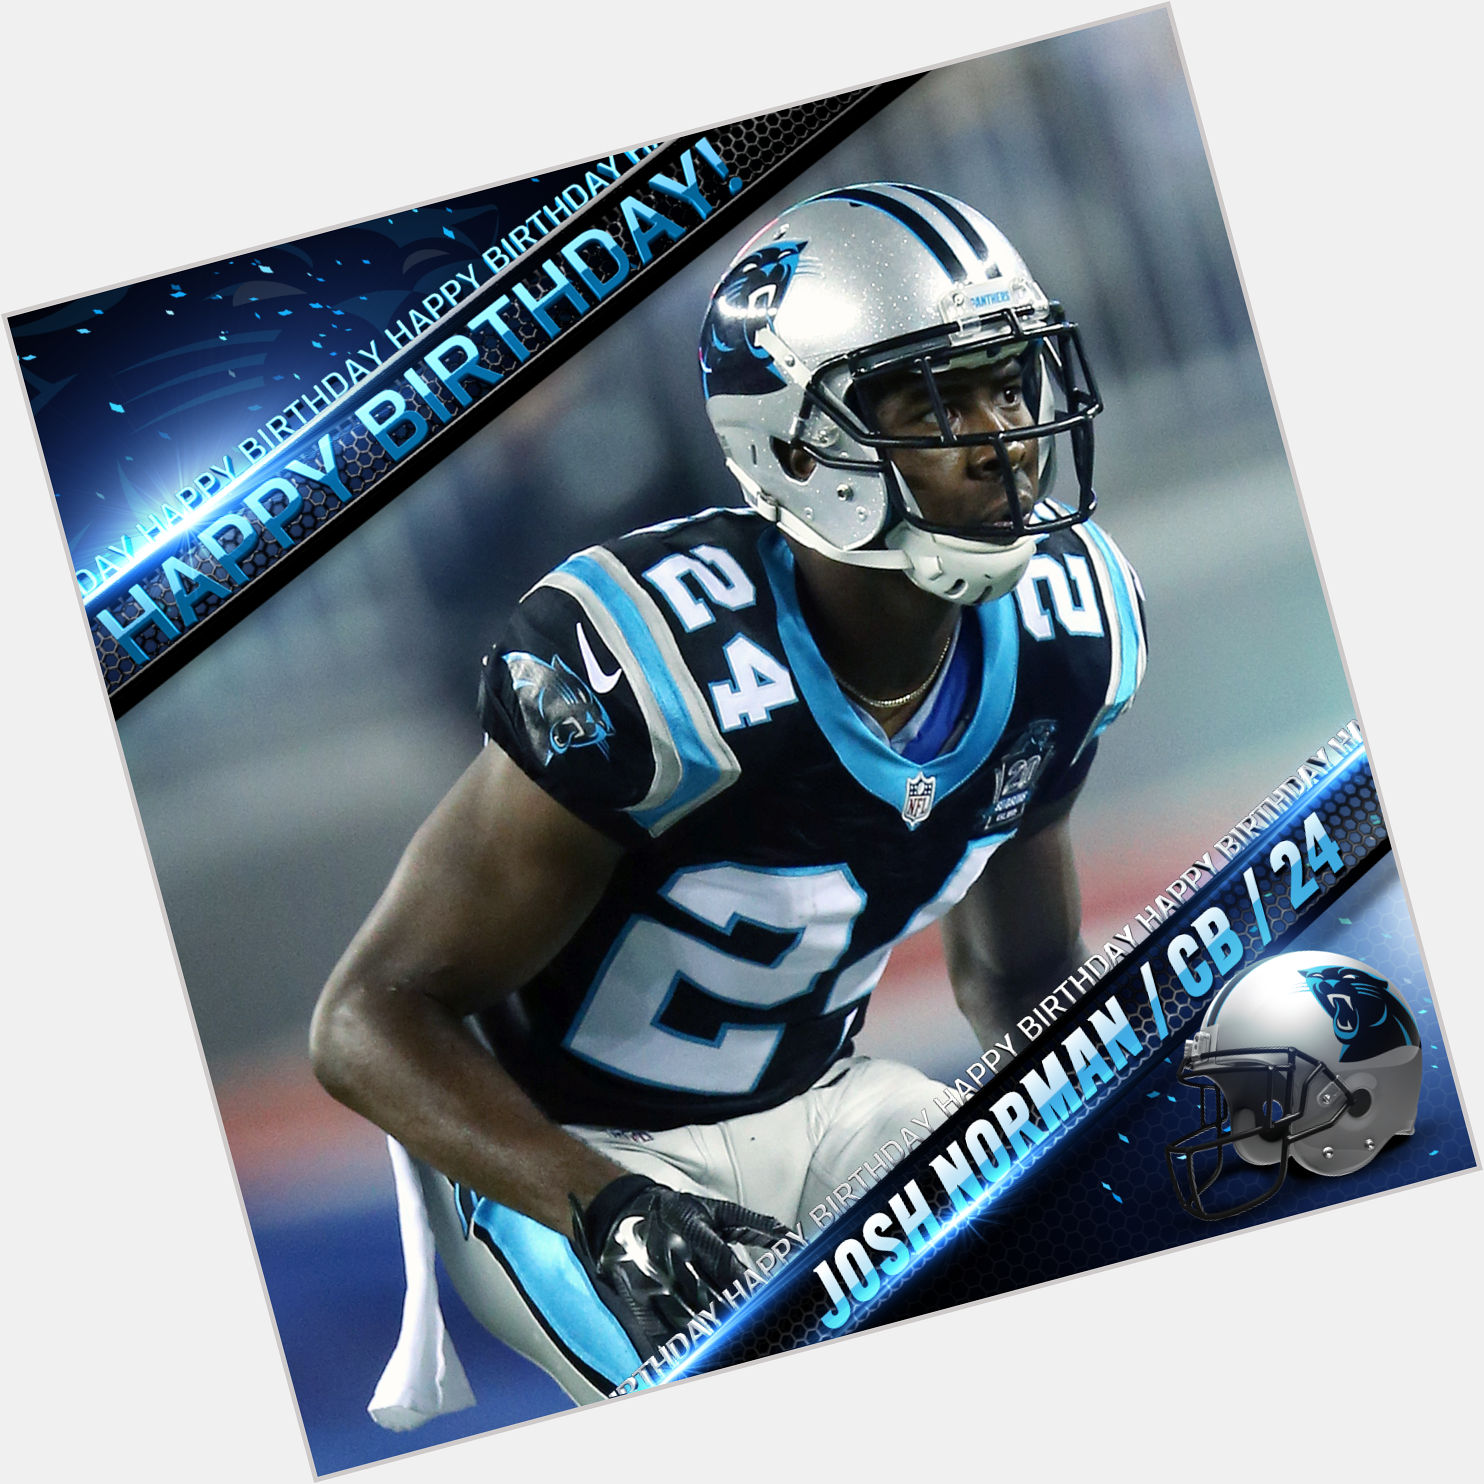 To wish CB a happy birthday! 

Read more about Normans breakout season:  